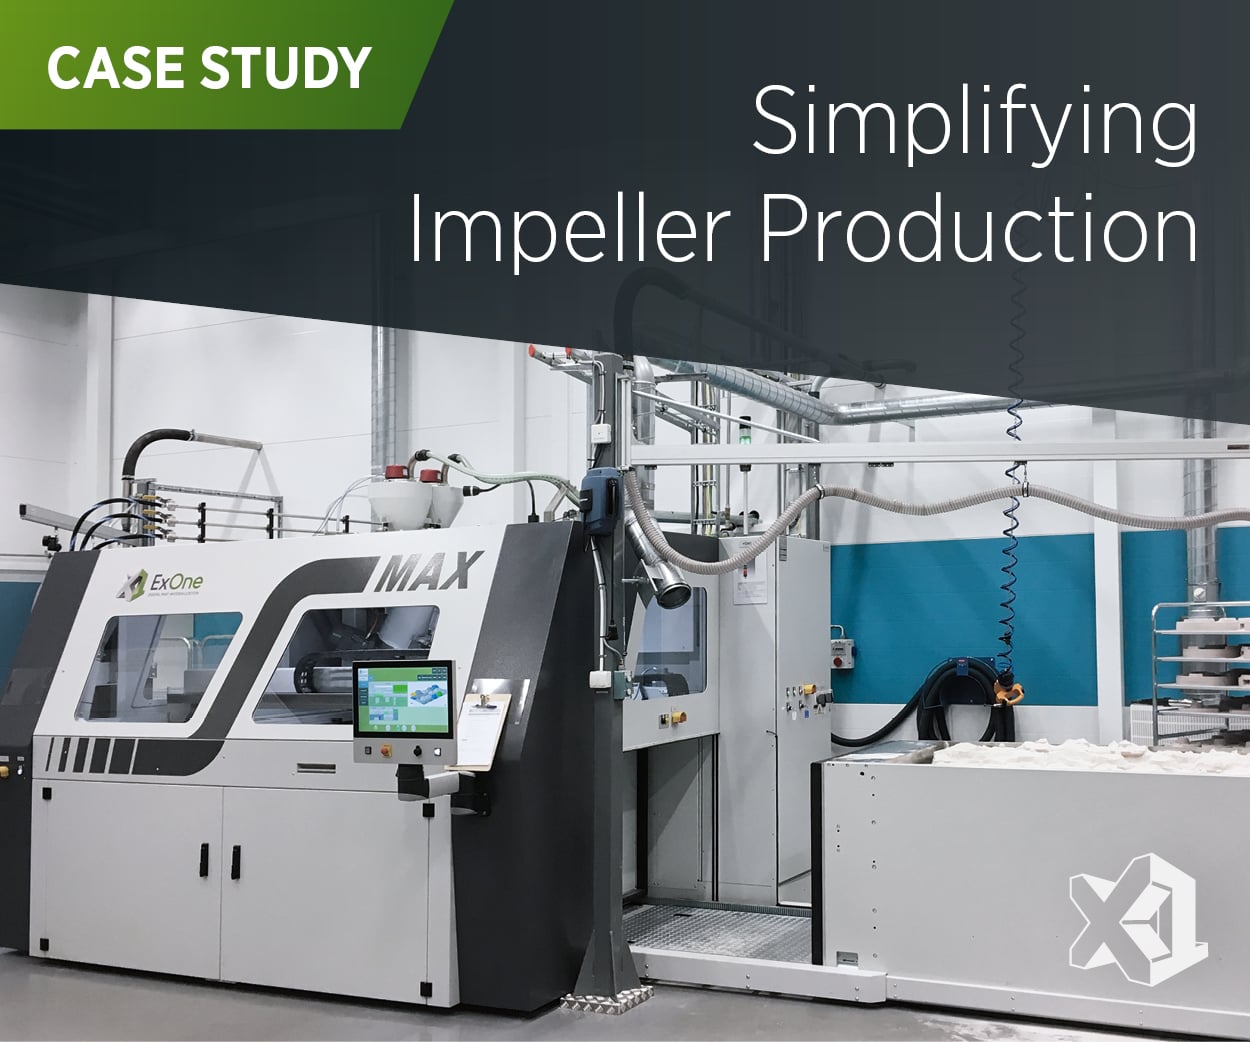 3D Printing Technology Dramatically Improves Manufacturing of Impellers